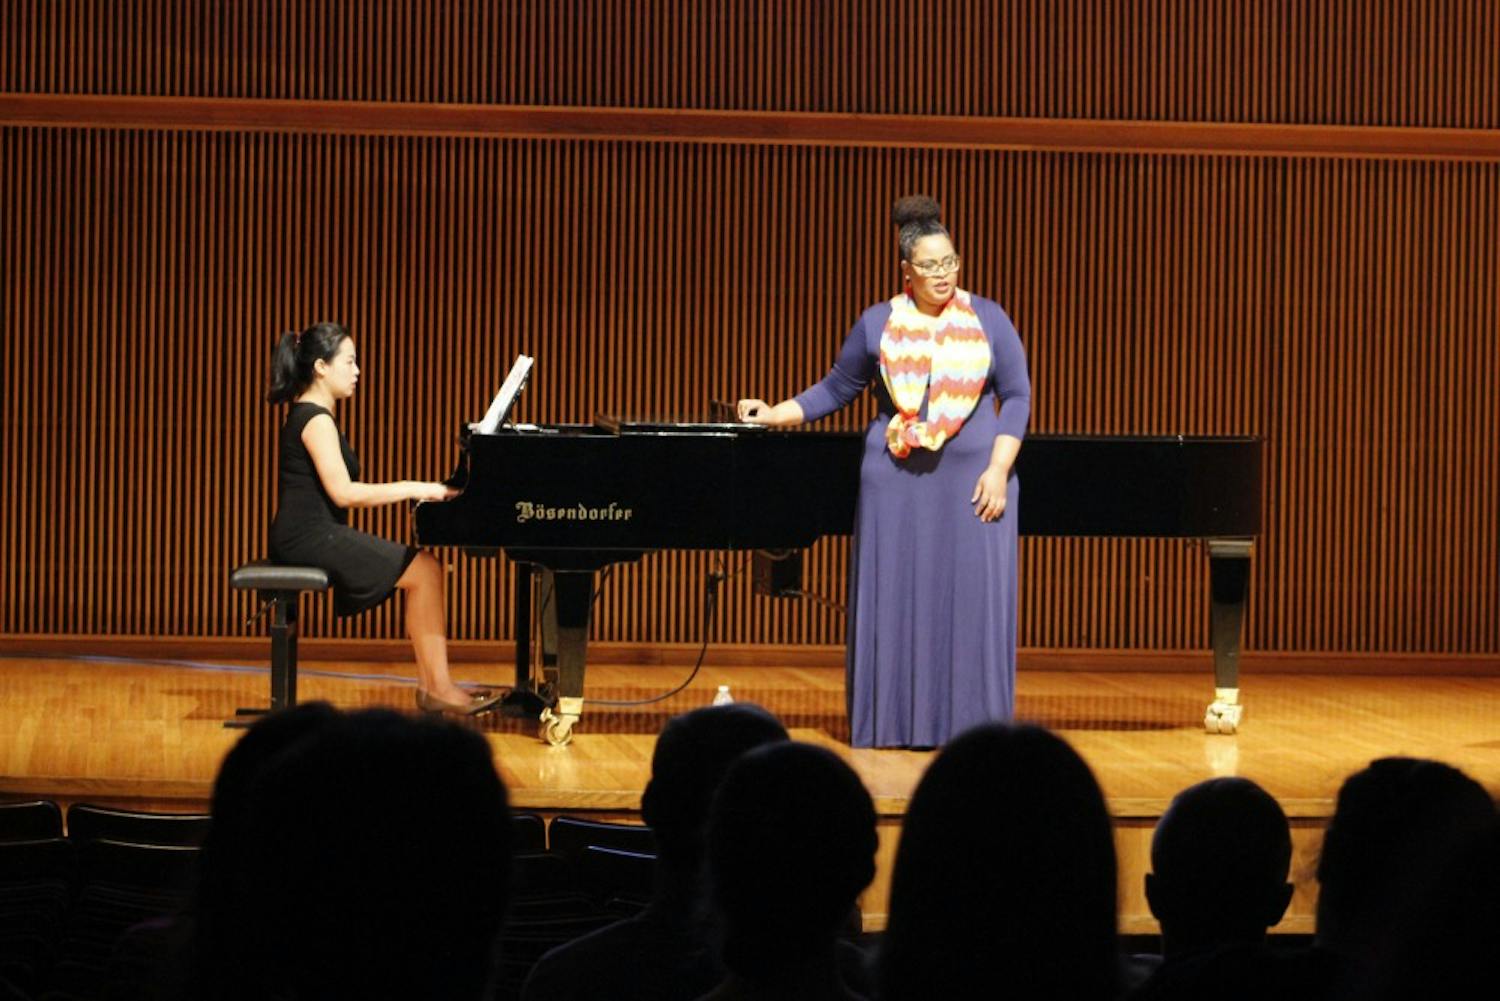 Guest singer Maegan Pollanias and pianist Nina Lee cover a sample of Caribbean art songs composed by Dominique Le Gendre.